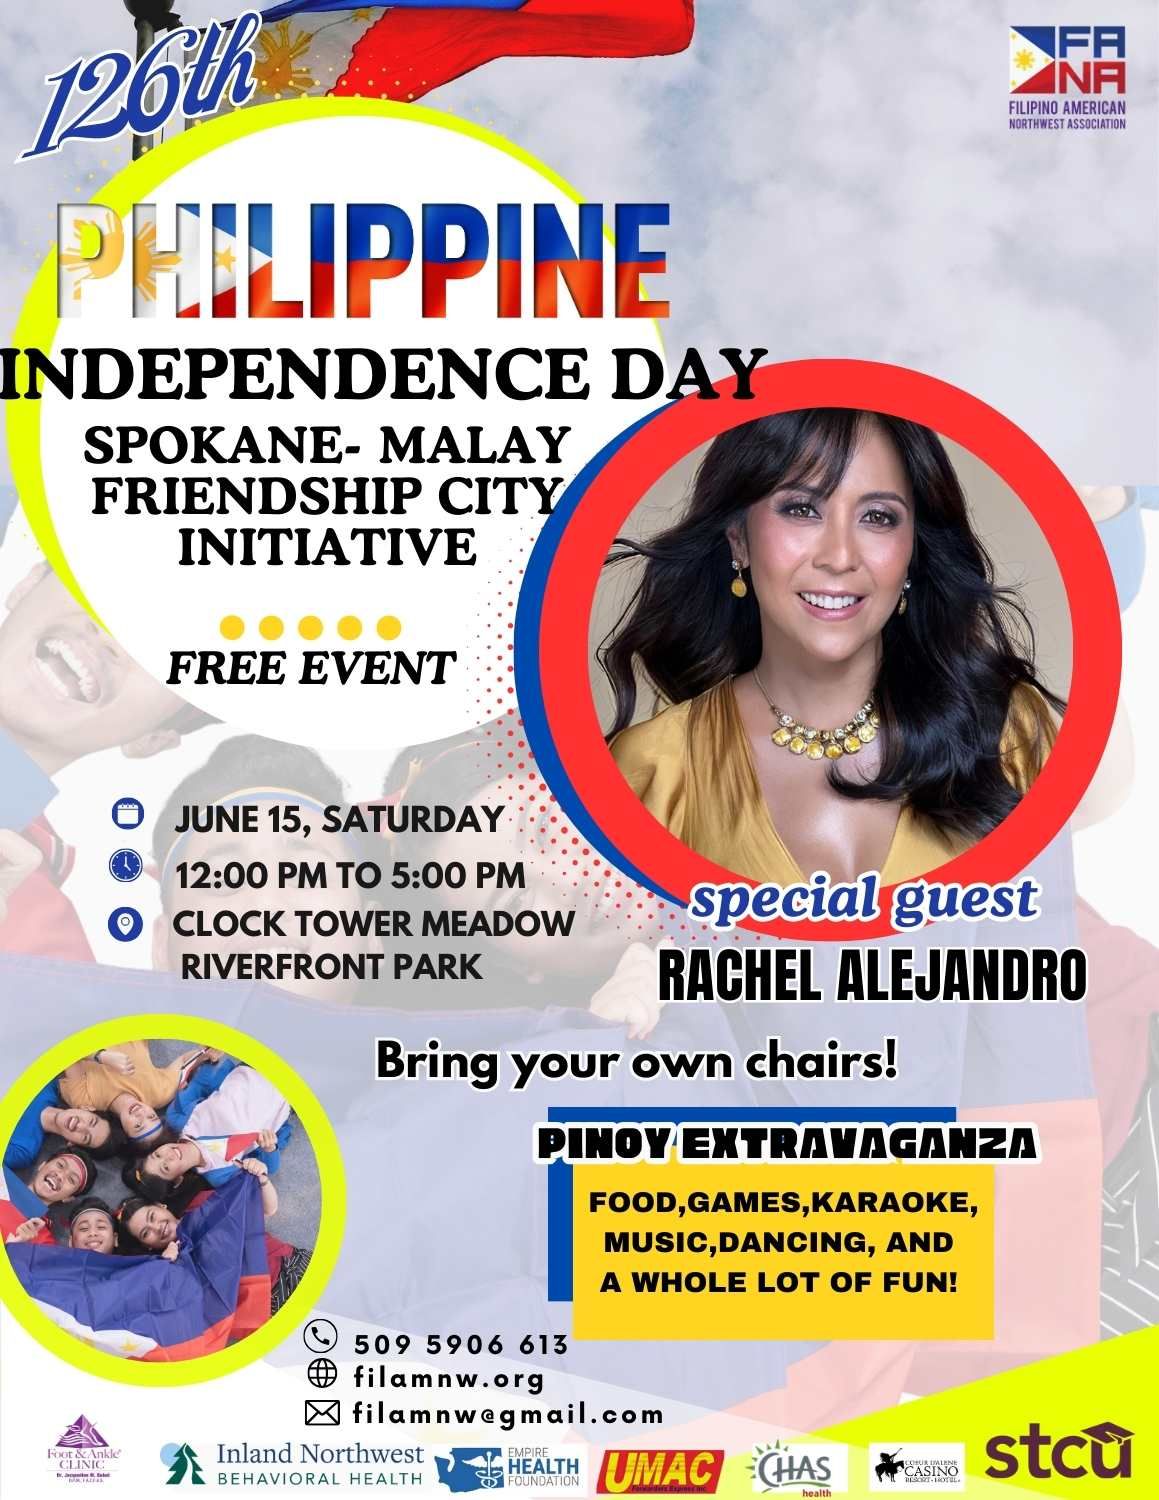 126th Philippine Independence Day (LET'S CELEBRATE SPOKANE- MALAY FRIENDSHIP CITY INITIATIVE)